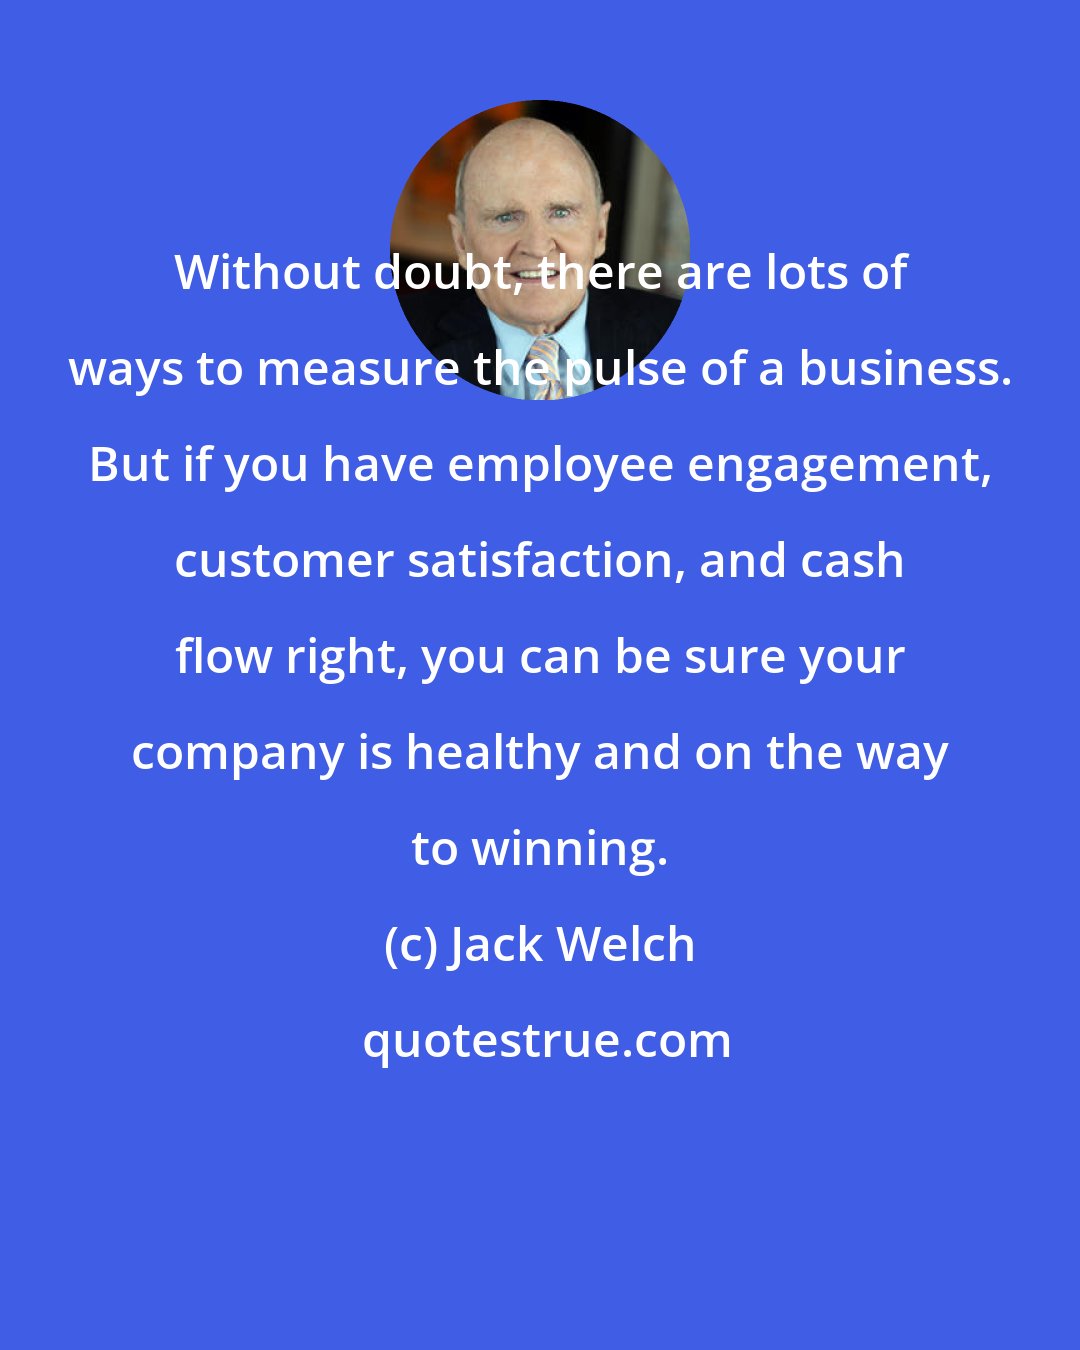 Jack Welch: Without doubt, there are lots of ways to measure the pulse of a business. But if you have employee engagement, customer satisfaction, and cash flow right, you can be sure your company is healthy and on the way to winning.